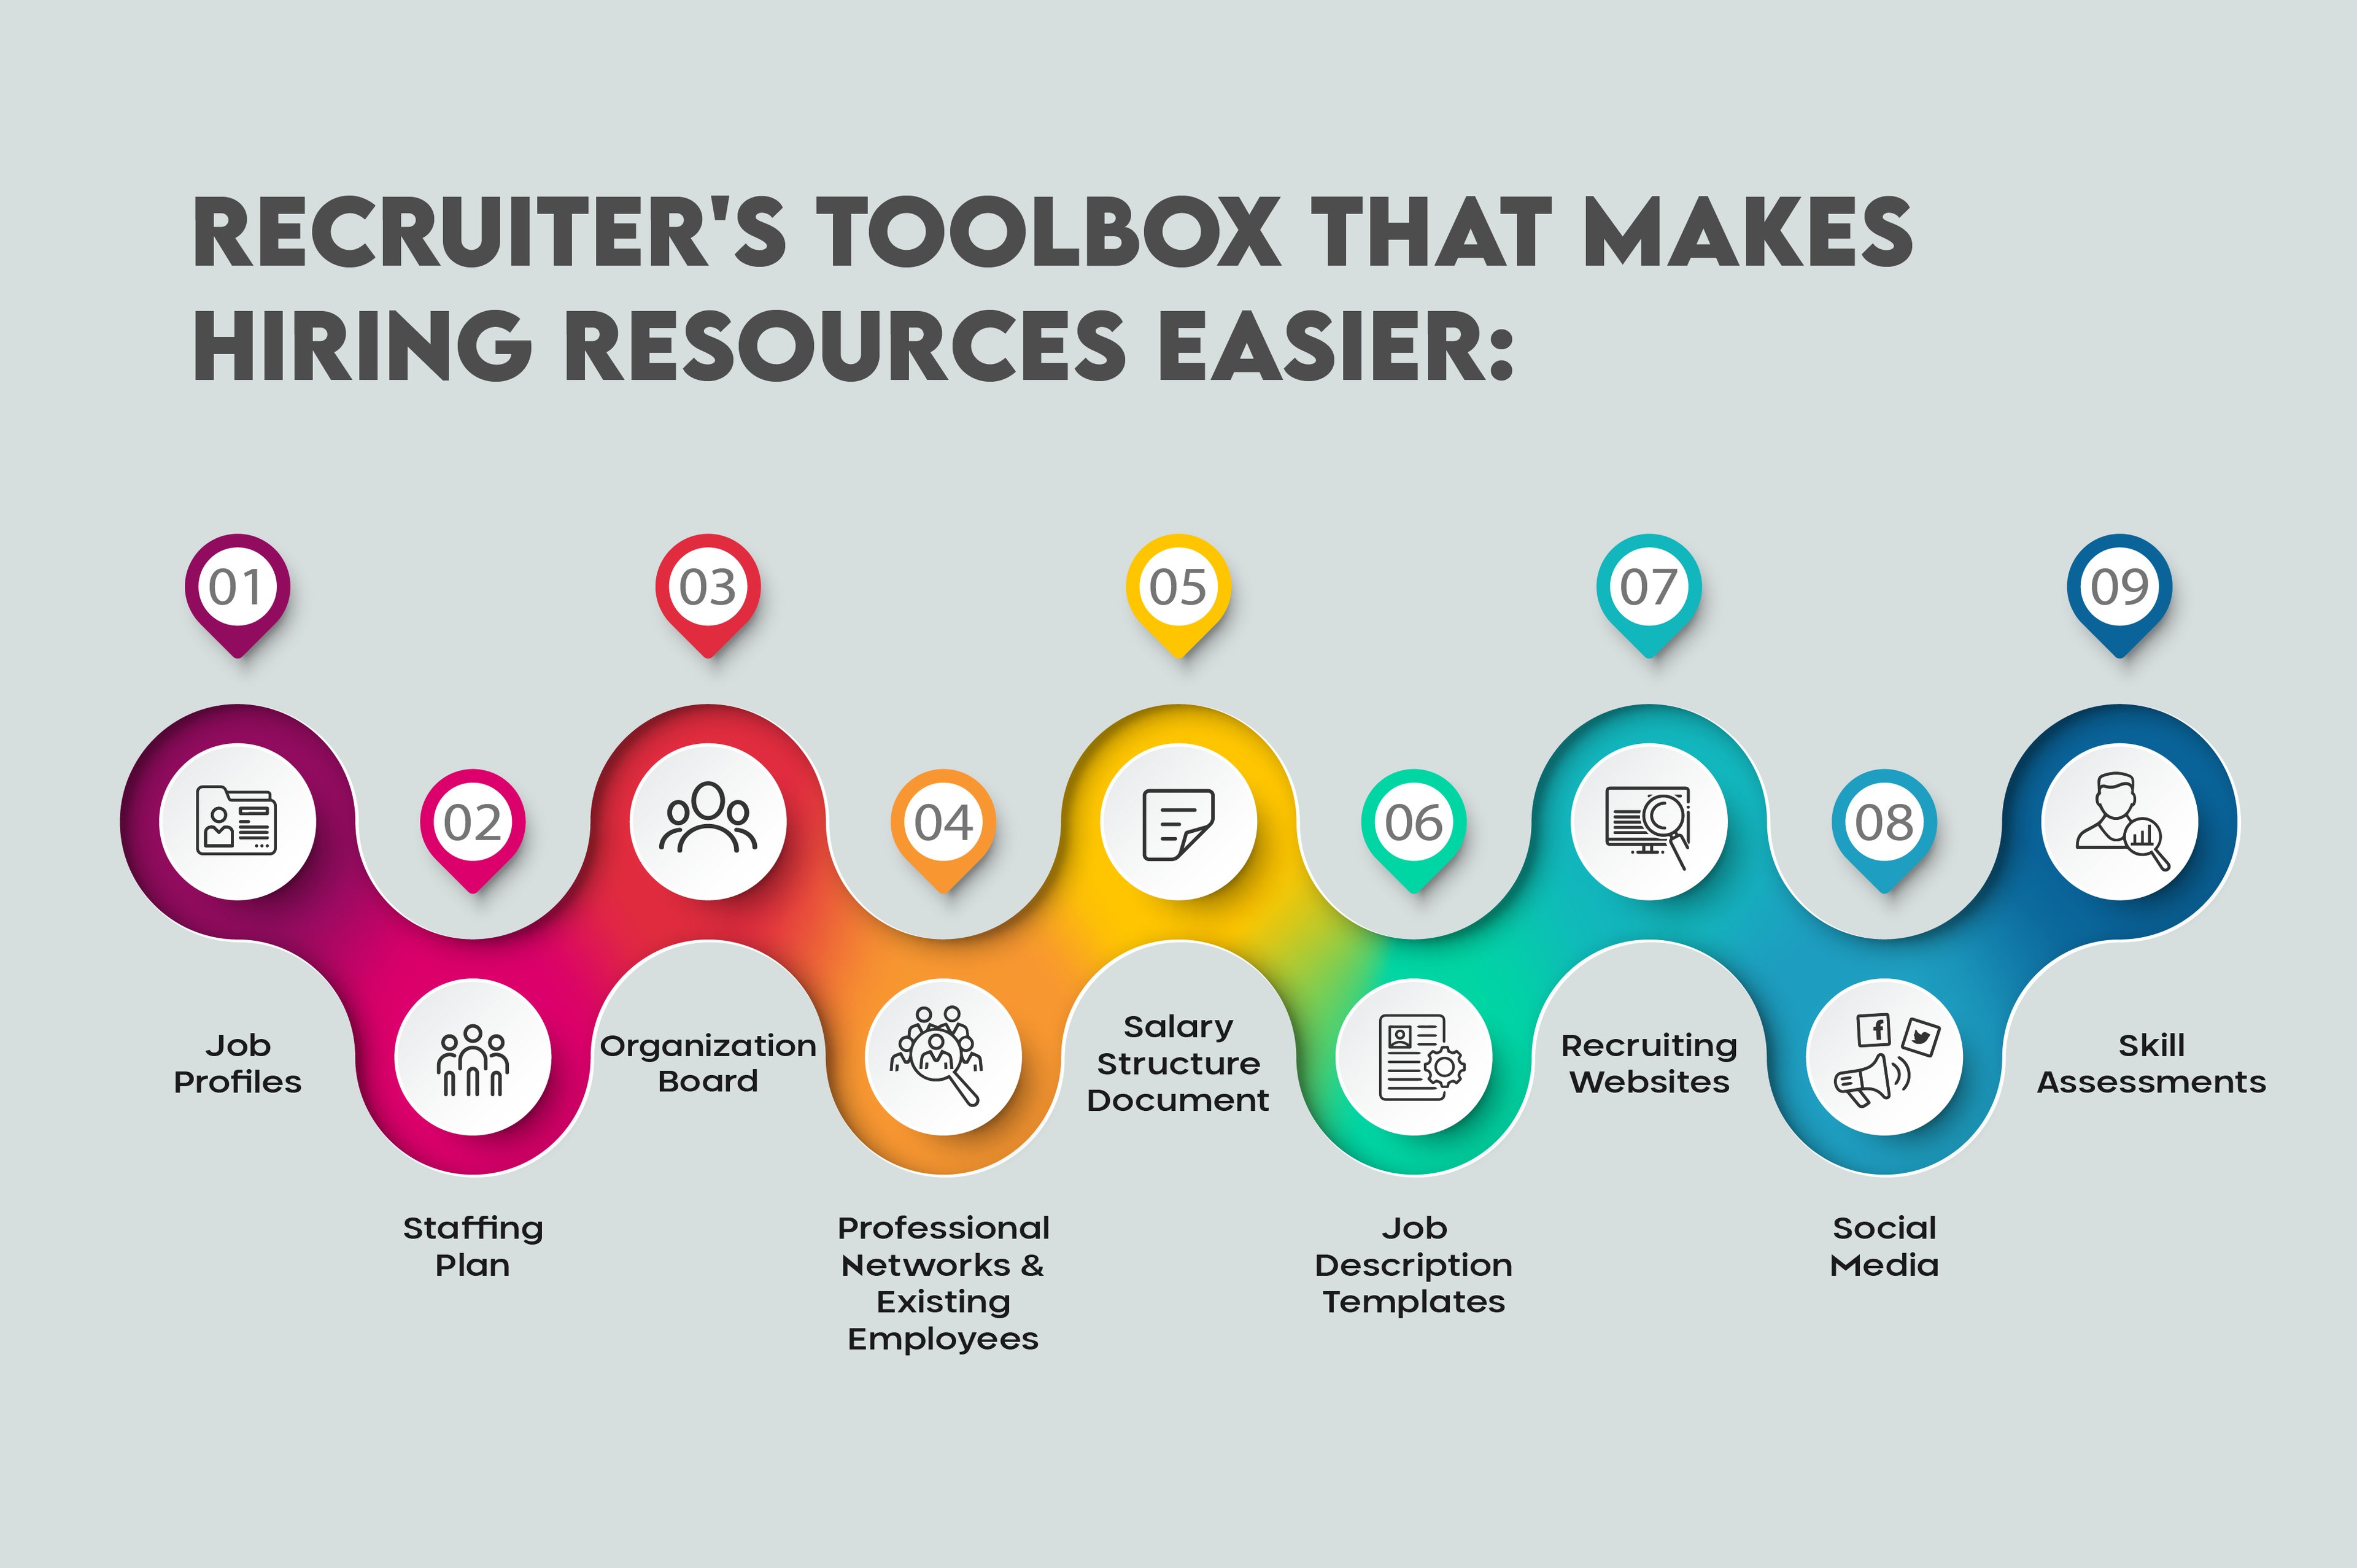 Recruiters Toolbox